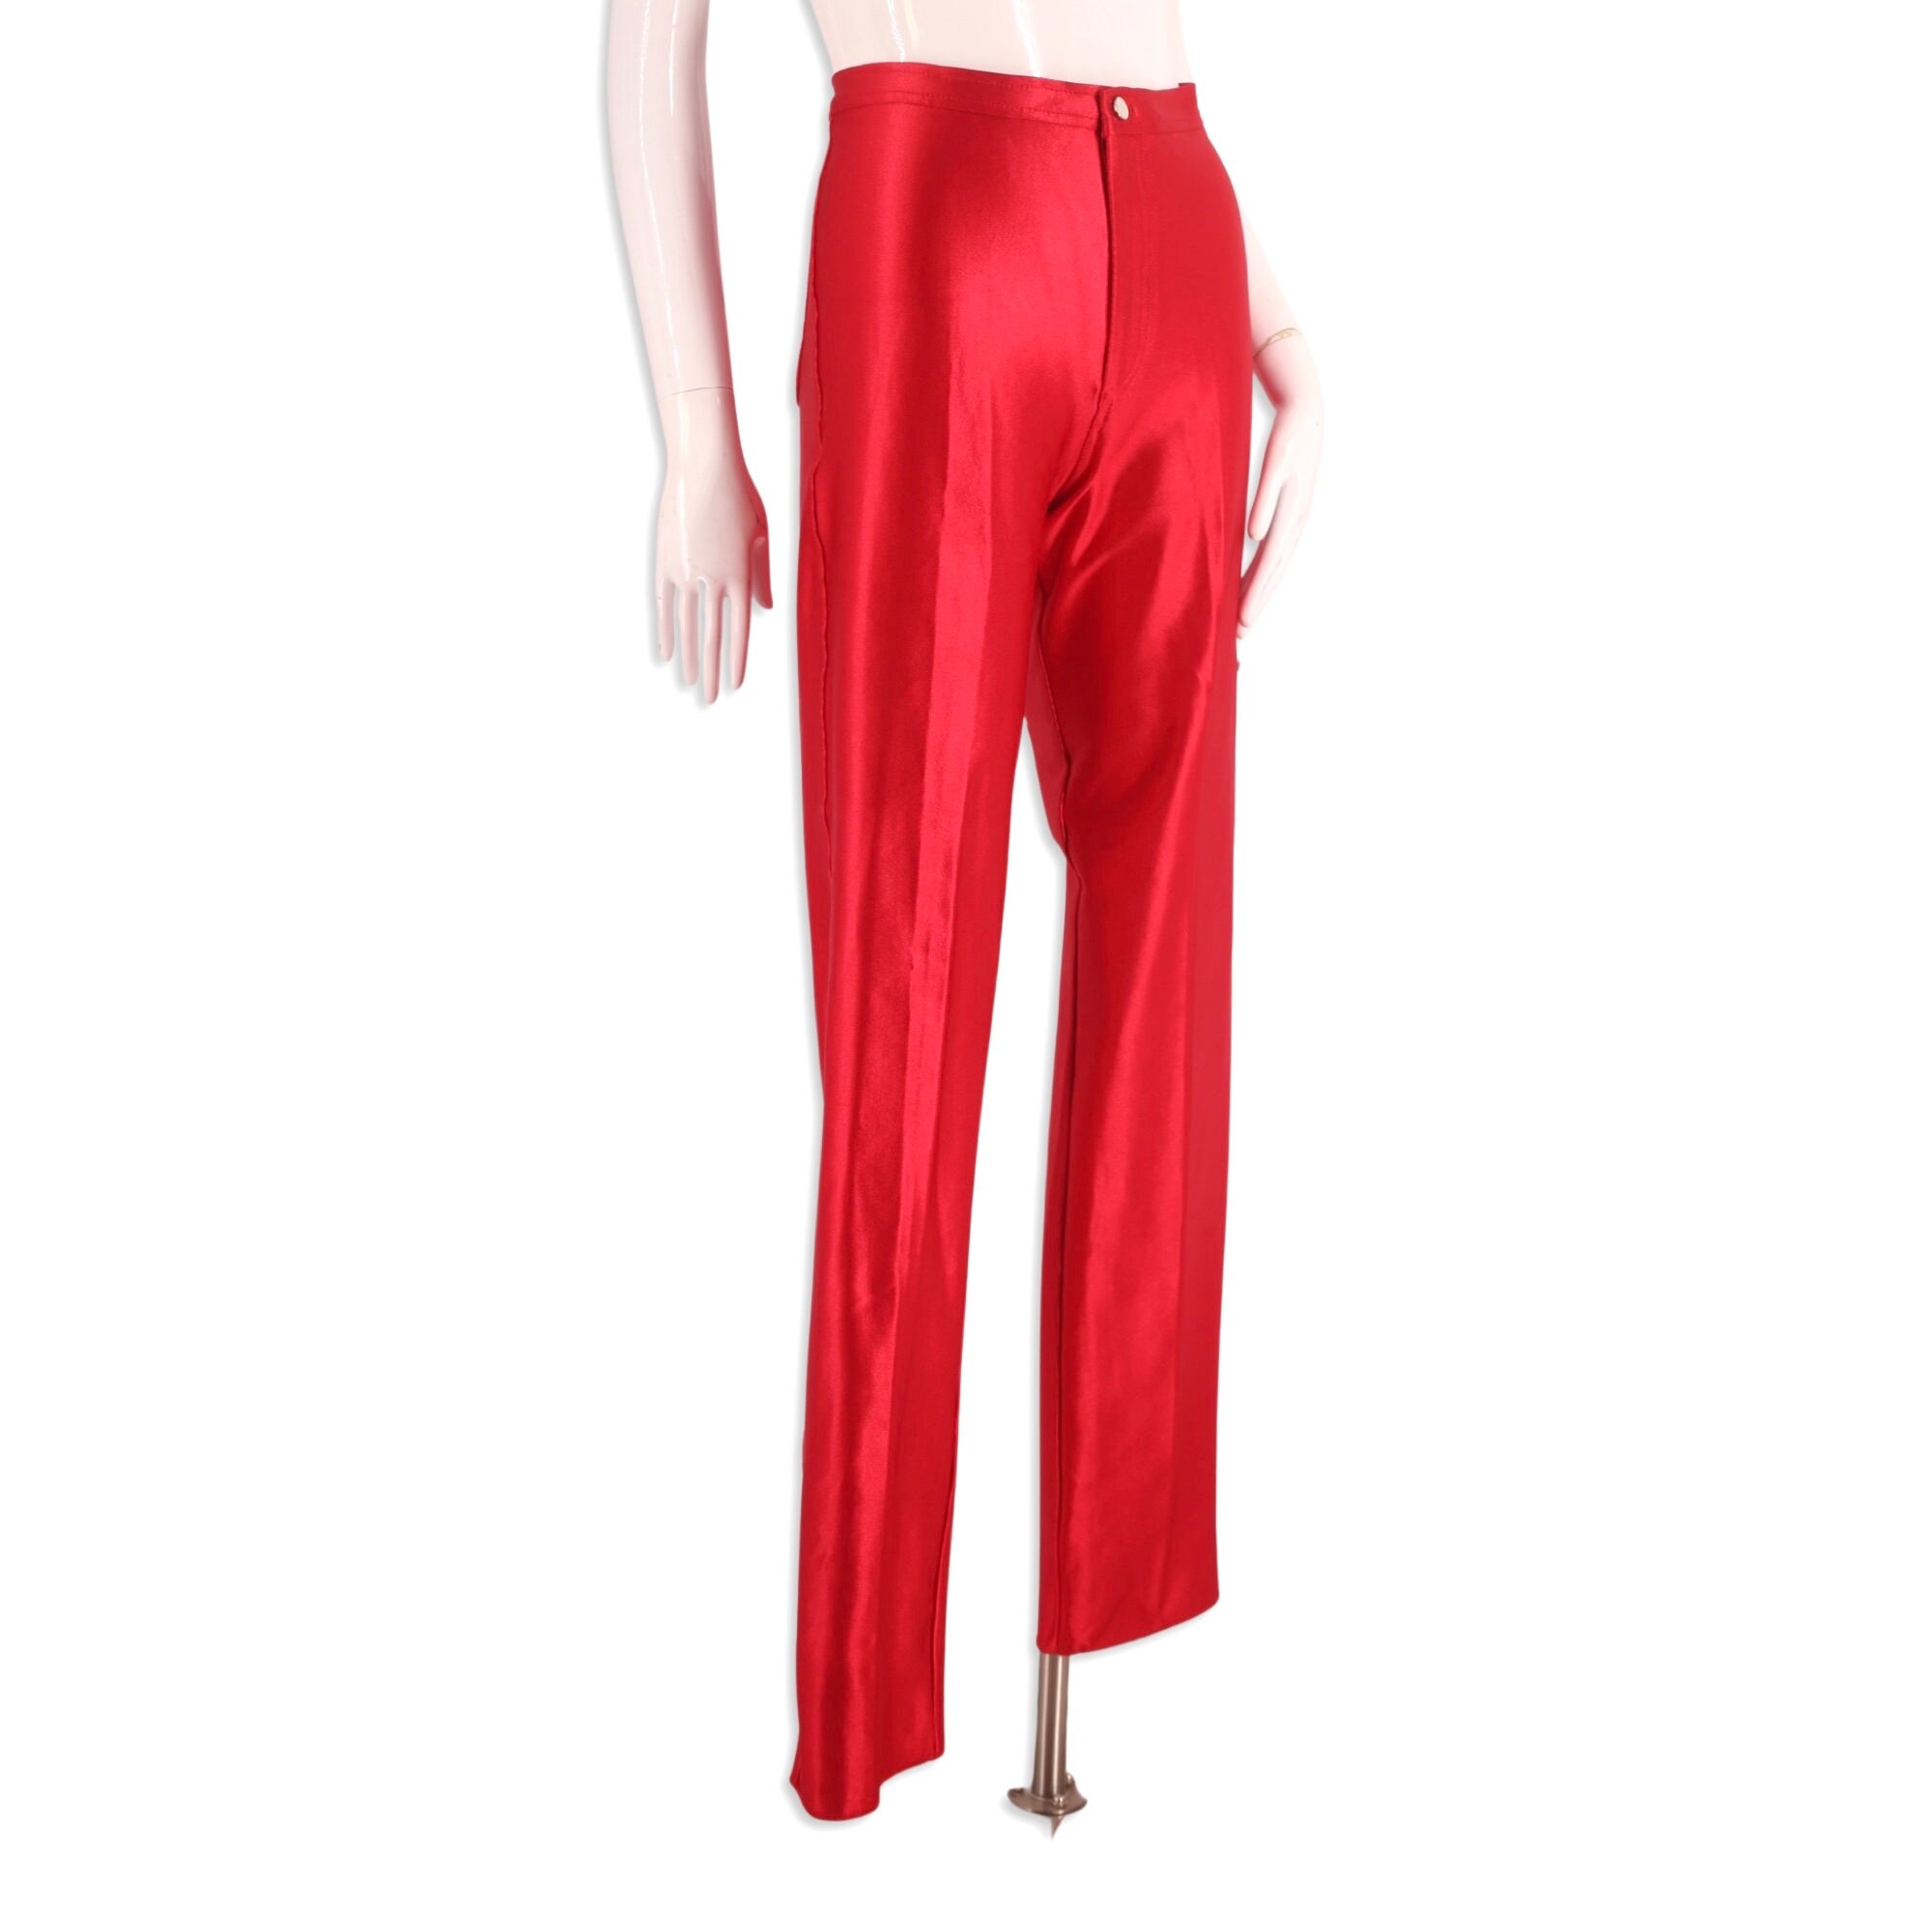 Vintage 70s Fredericks of Hollywood Red Disco Pants/1970s High